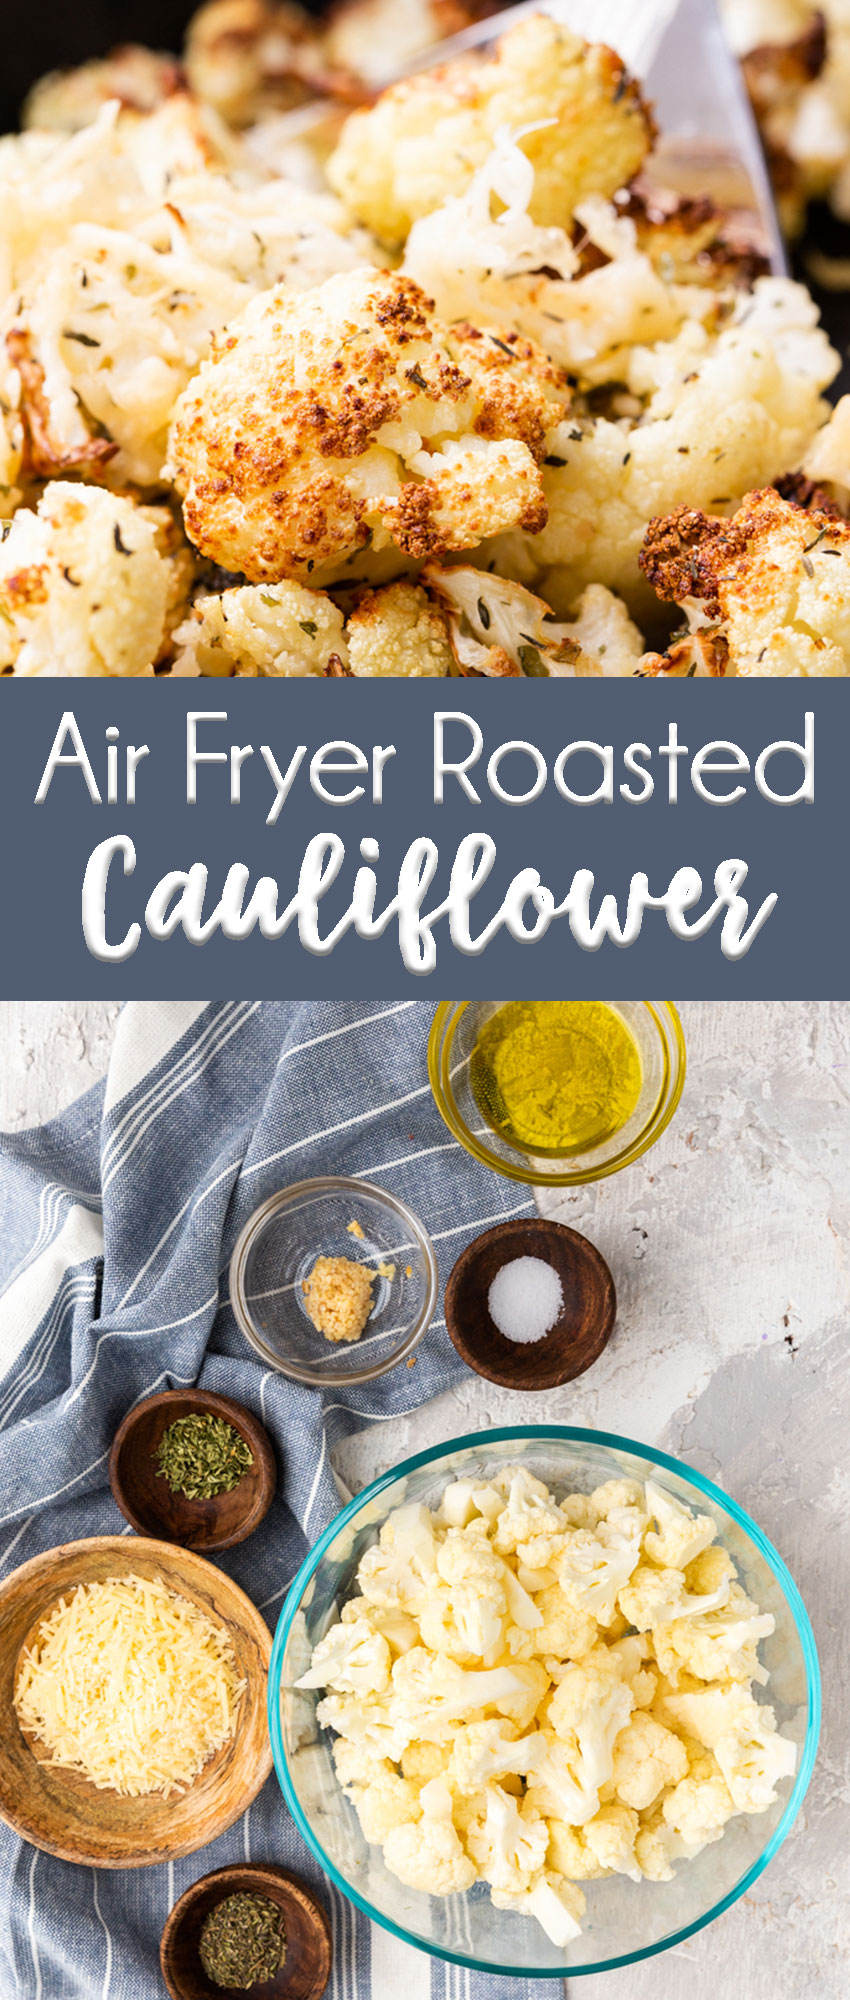 Deliciously crispy, but fork tender cauliflower roasted in an air fryer